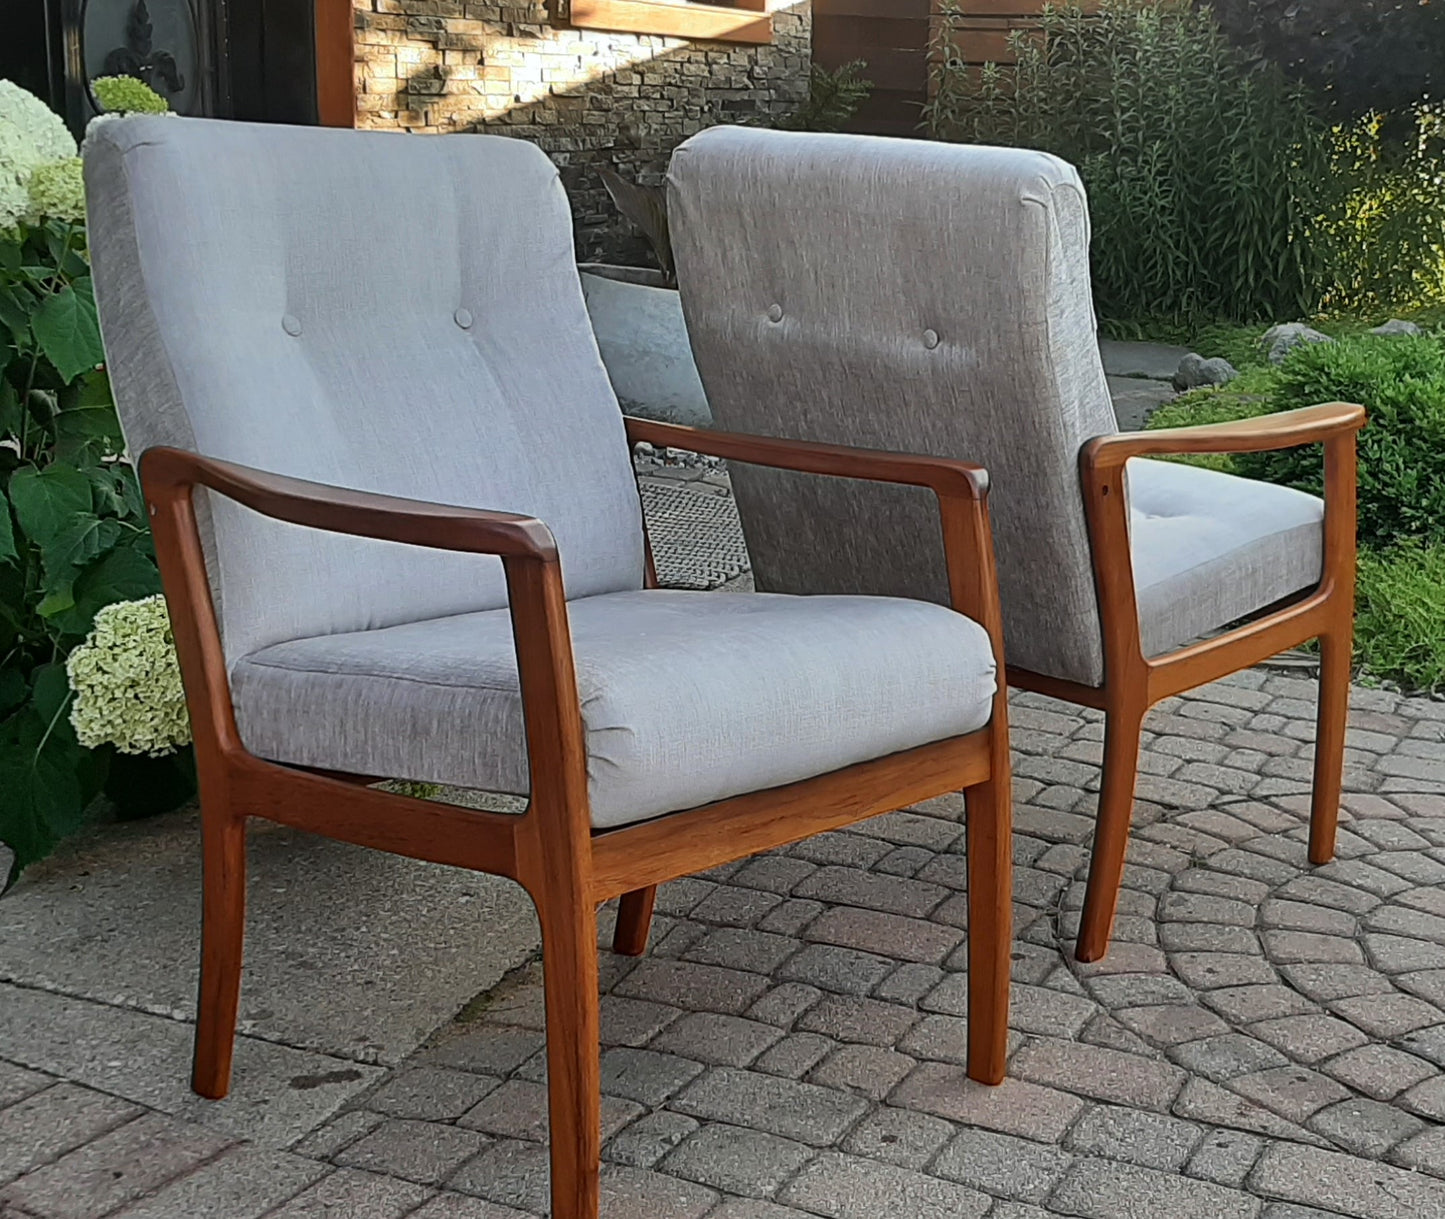 REFINISHED REUPHOLSTERED Pair of Mid Century Modern Teak Armchairs,  Perfect